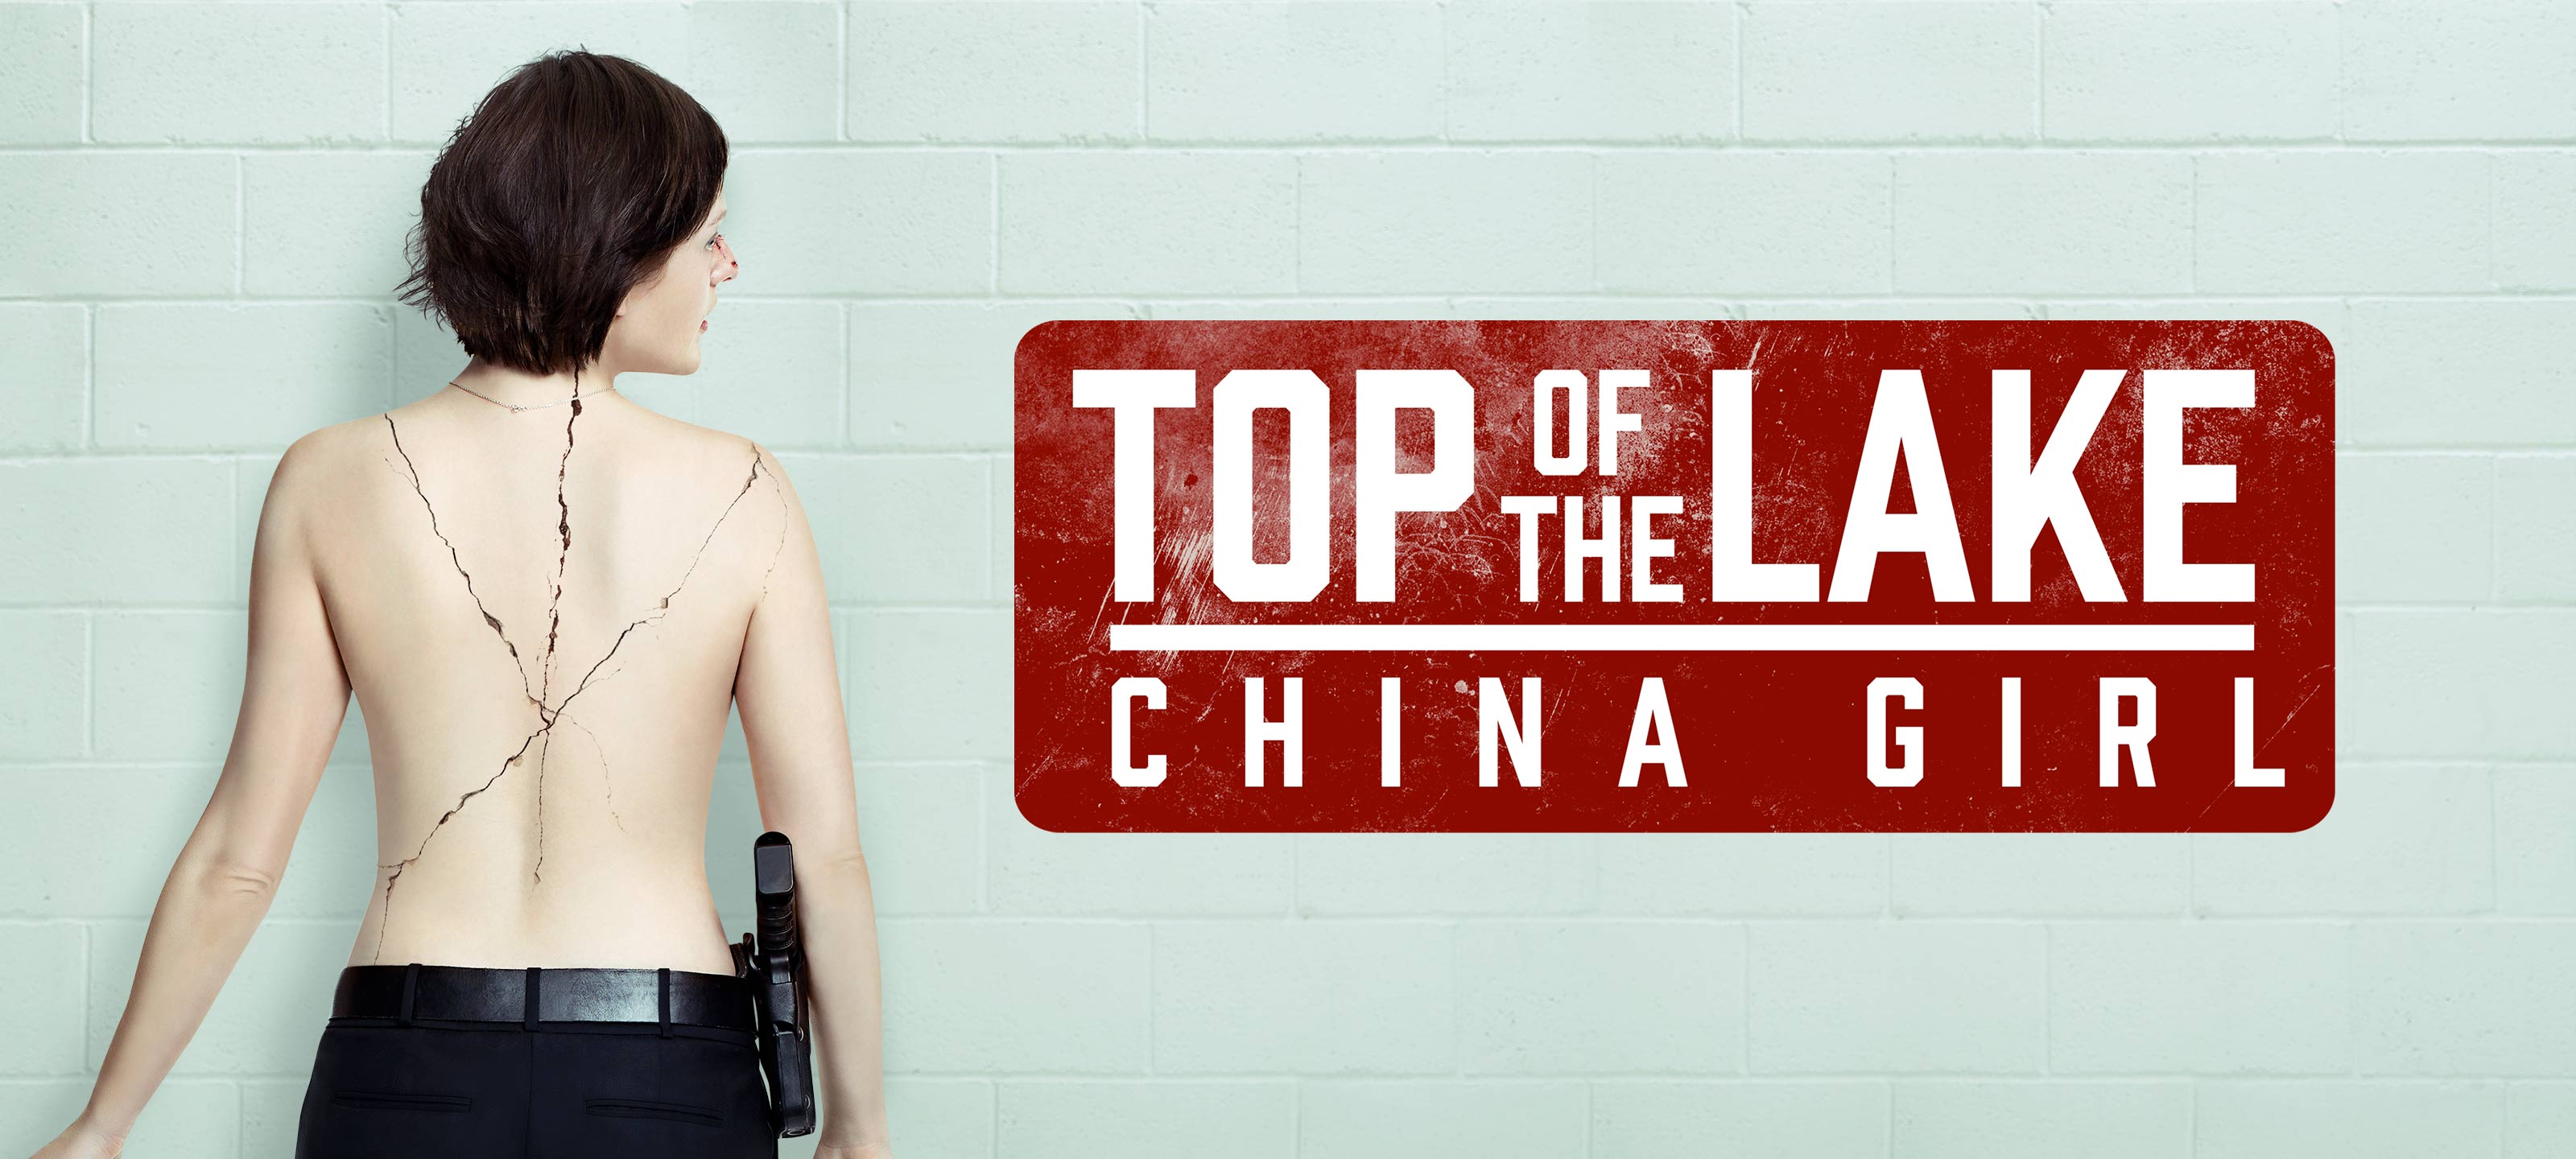 Watch Top of the Lake Online | Stream Full Episodes